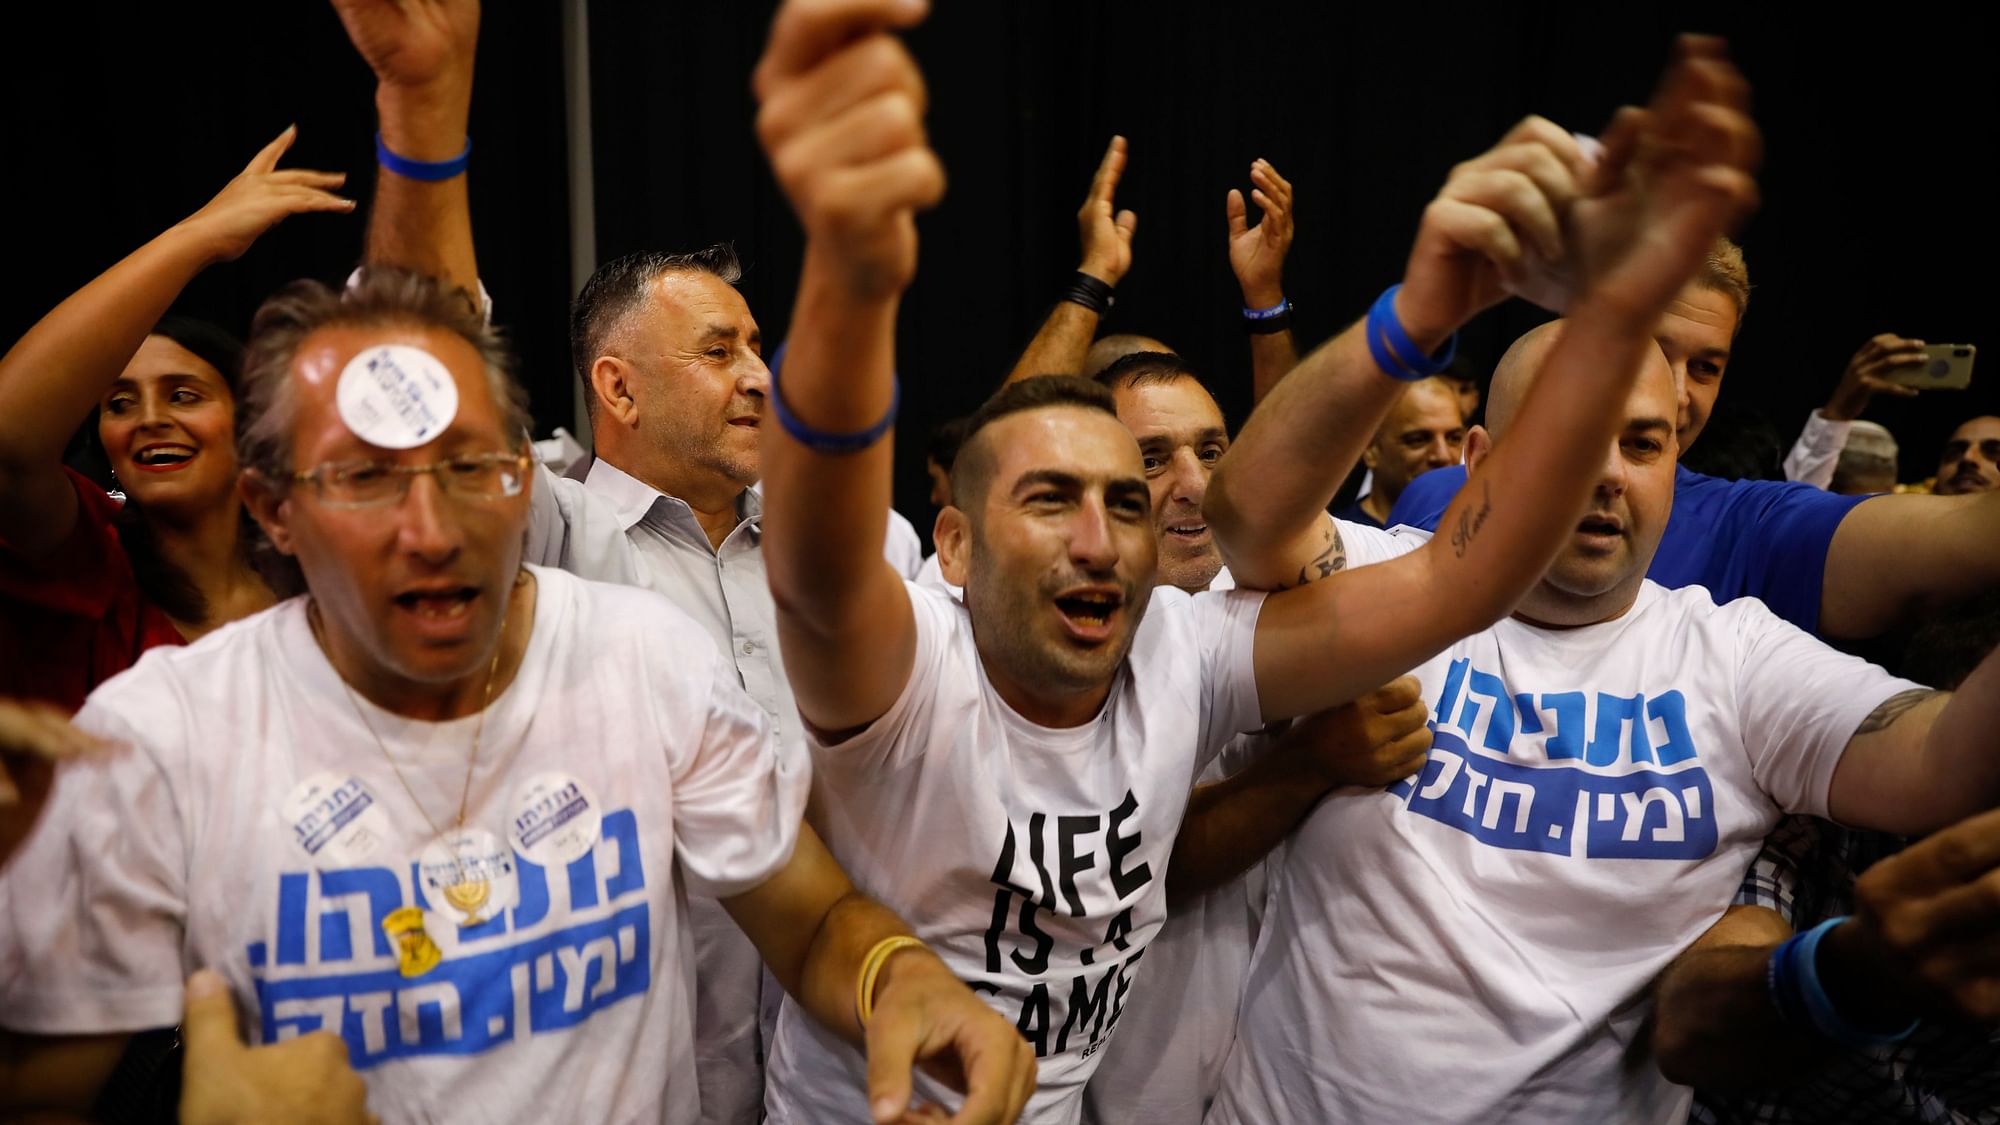 Israeli Prime Minister Benjamin Netanyahu supporters chant as they await results of the elections in Tel Aviv.